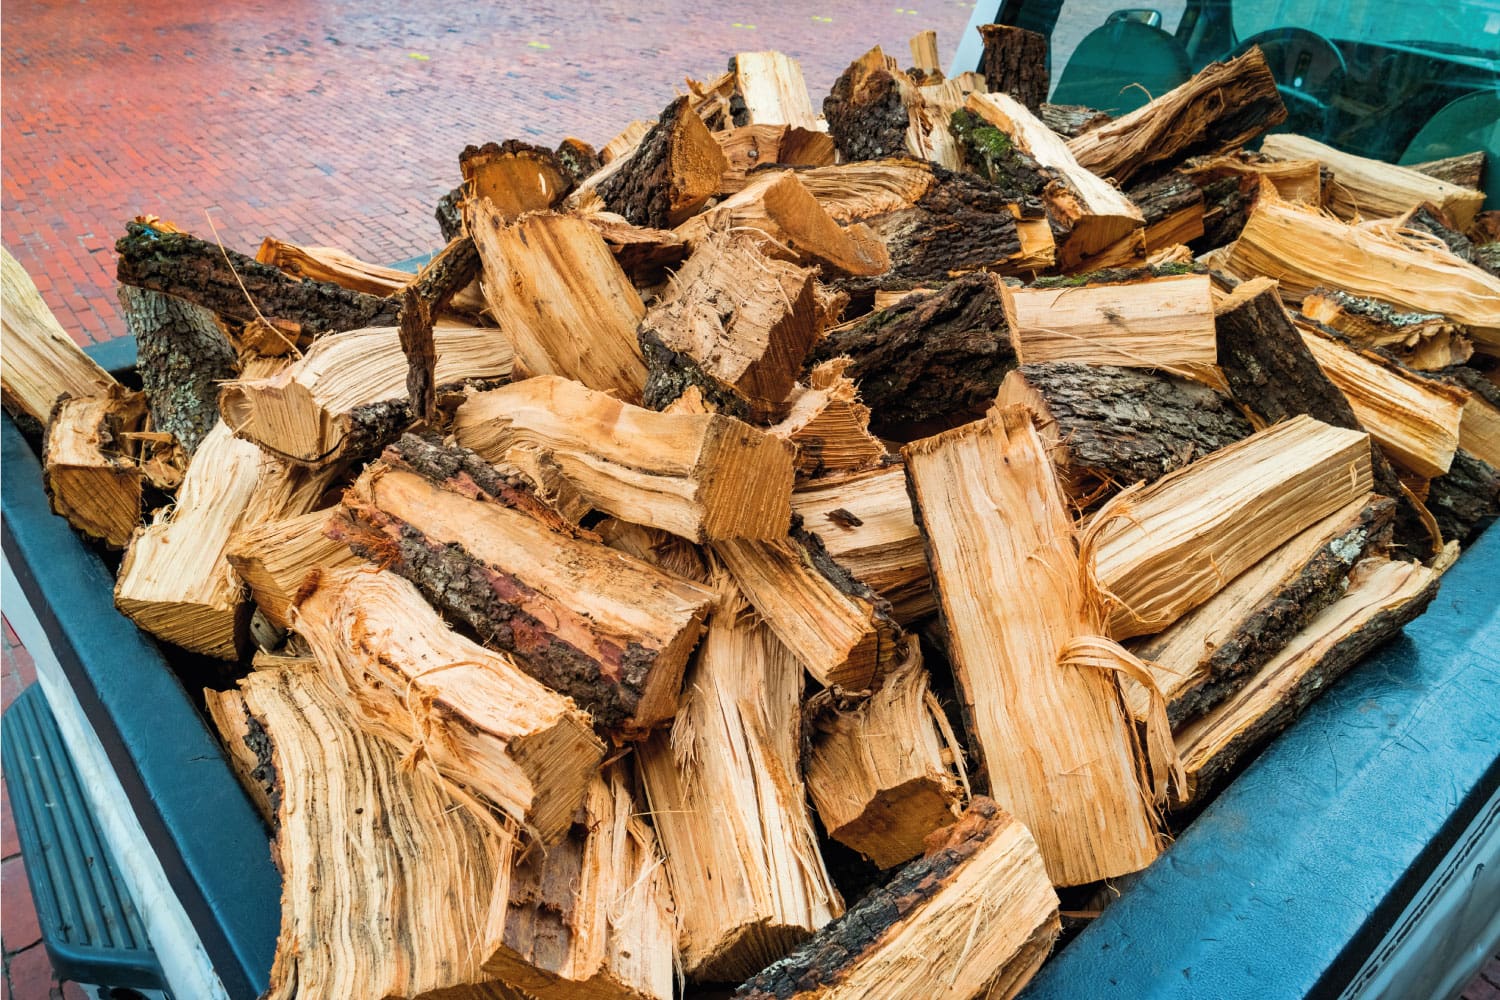 Stock photo of a heap of wood for Texan barbecue being transported in a pickup truck to restaurants. How Much Does A Pickup Truck Load Of Firewood Cost